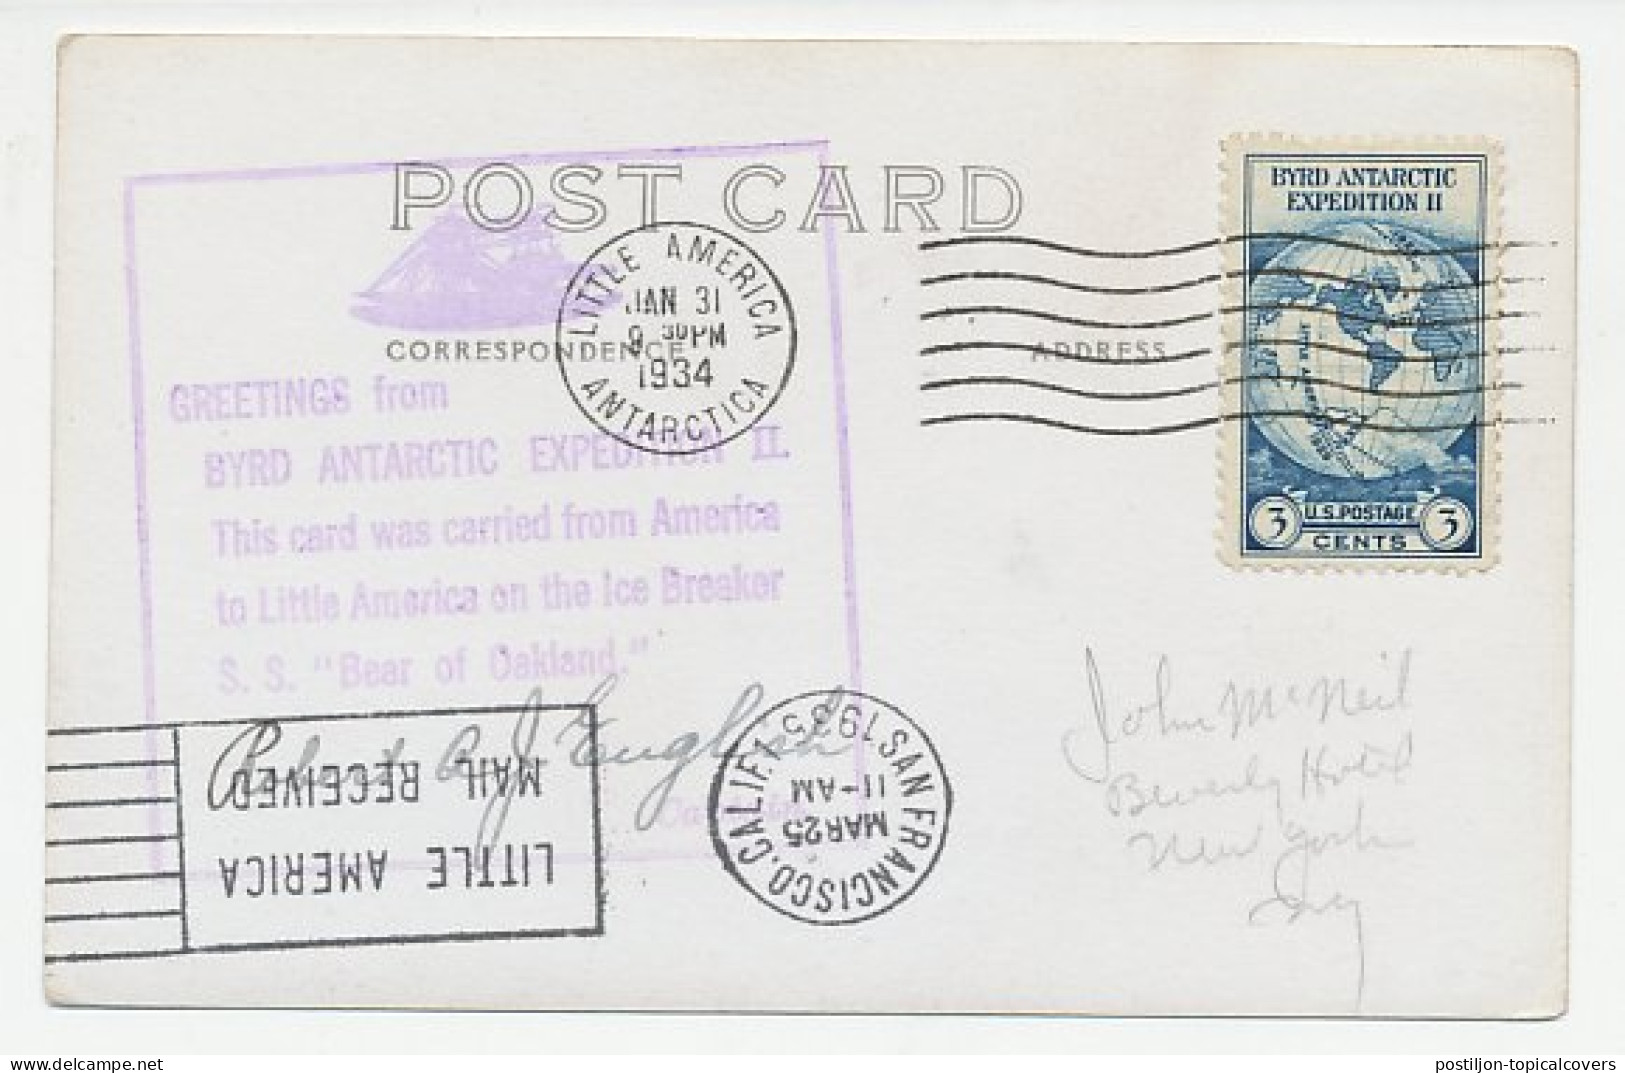 Card / Postmark USA 1934 Byrd Antarctic Expedition II - Photo Postcard Whale - Arctic Expeditions